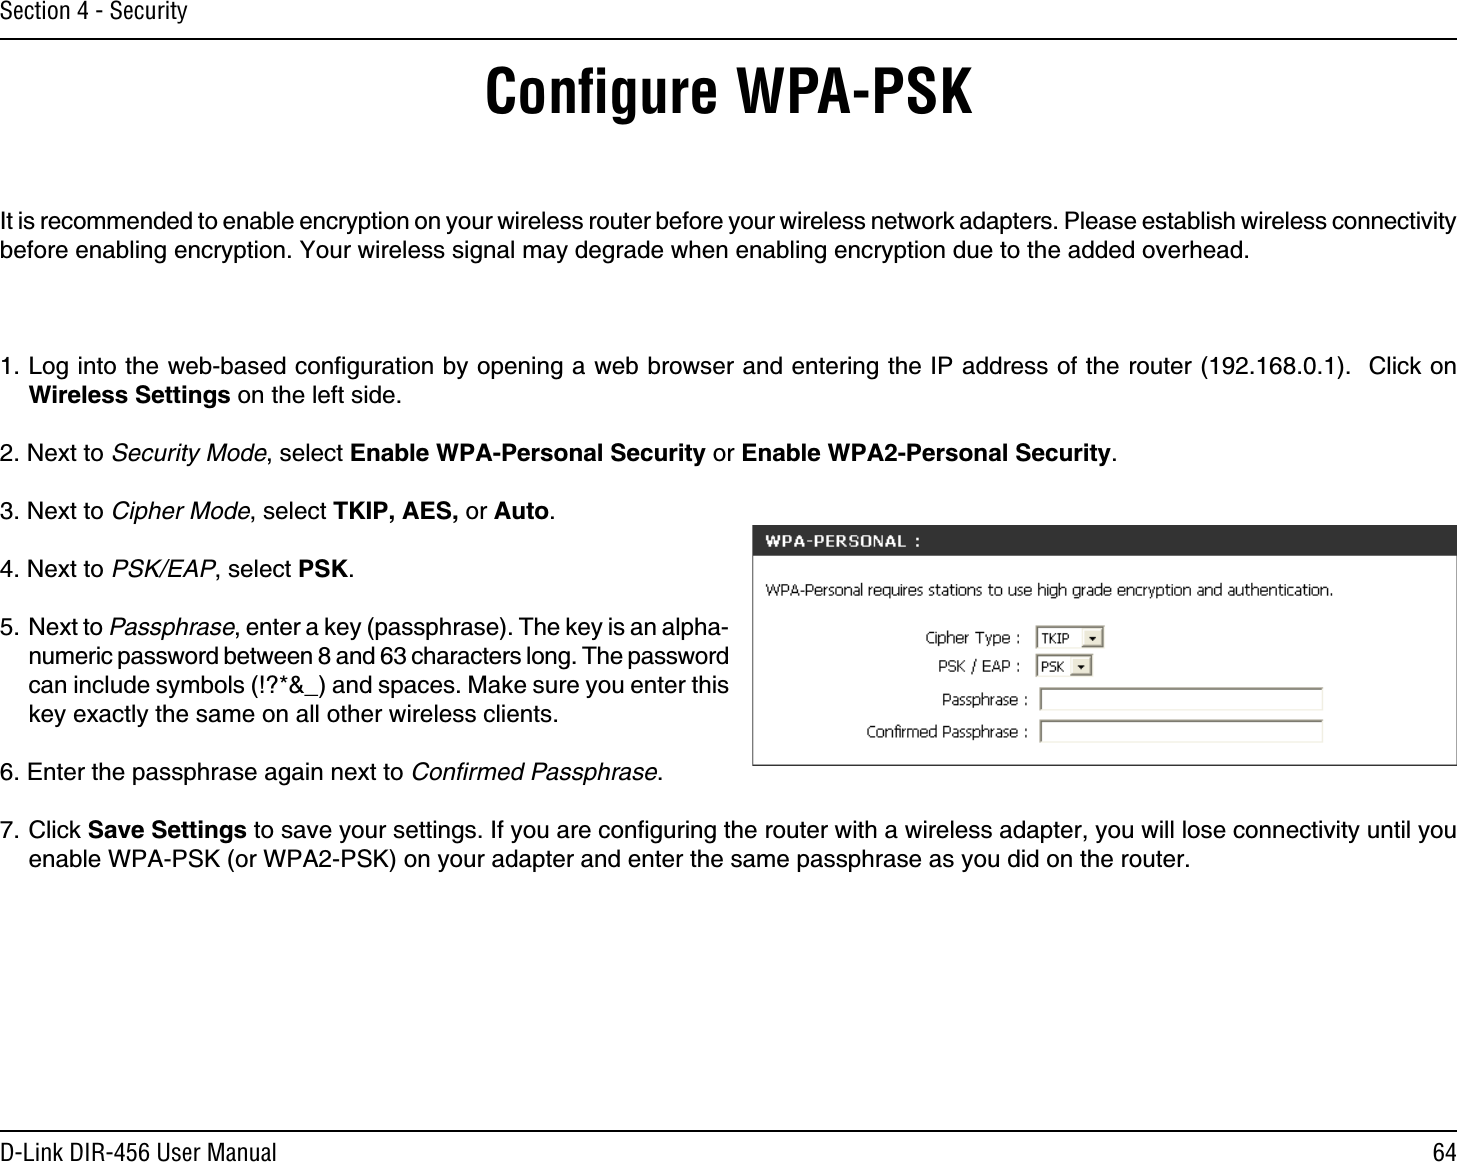 64D-Link DIR-456 User ManualSection 4 - SecurityConﬁgure WPA-PSKIt is recommended to enable encryption on your wireless router before your wireless network adapters. Please establish wireless connectivity before enabling encryption. Your wireless signal may degrade when enabling encryption due to the added overhead.1. Log into the web-based conﬁguration by opening a web browser and entering the IP address of the router (192.168.0.1).  Click on Wireless Settings on the left side.2. Next to Security Mode, select Enable WPA-Personal Security or Enable WPA2-Personal Security.3. Next to Cipher Mode, select TKIP, AES, or Auto.4. Next to PSK/EAP, select PSK.5. Next to Passphrase, enter a key (passphrase). The key is an alpha-numeric password between 8 and 63 characters long. The password can include symbols (!?*&amp;_) and spaces. Make sure you enter this key exactly the same on all other wireless clients.6. Enter the passphrase again next to Conﬁrmed Passphrase.7. Click Save Settings to save your settings. If you are conﬁguring the router with a wireless adapter, you will lose connectivity until you enable WPA-PSK (or WPA2-PSK) on your adapter and enter the same passphrase as you did on the router.